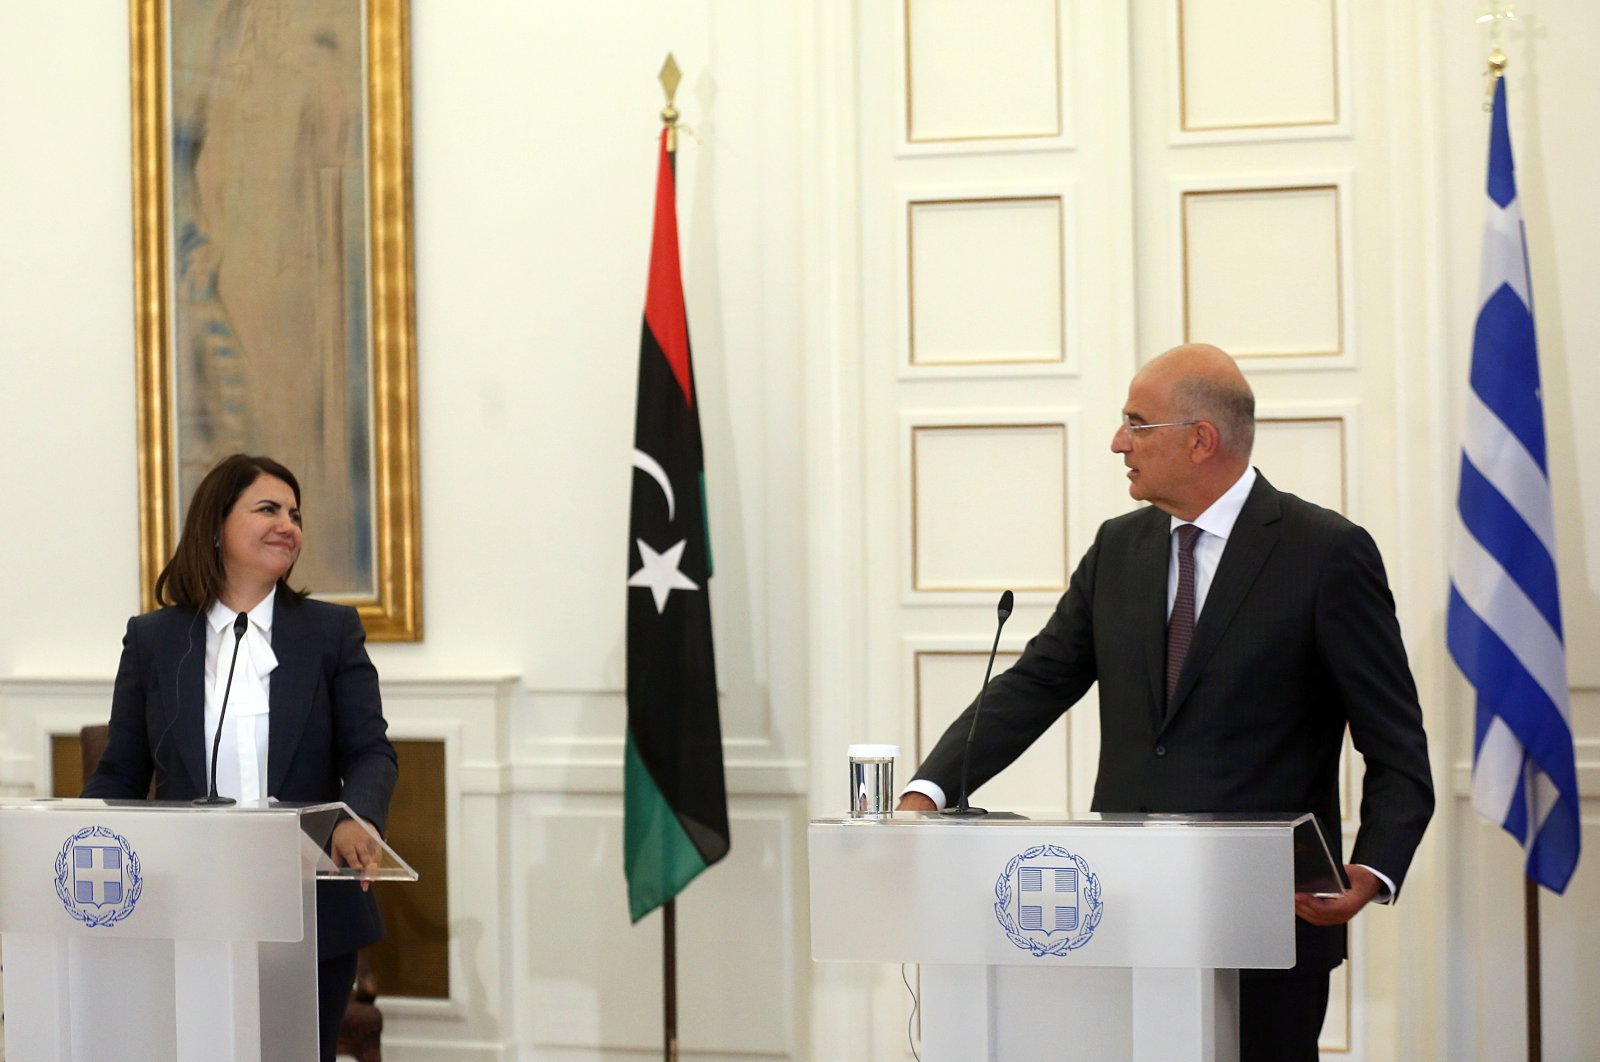 Greek Foreign Minister Nikos Dendias (R) and Libyan Foreign Minister Najla El Mangoush (L), make statements after their meeting in Athens, Greece, Sept. 6, 2021. (EPA Photo)